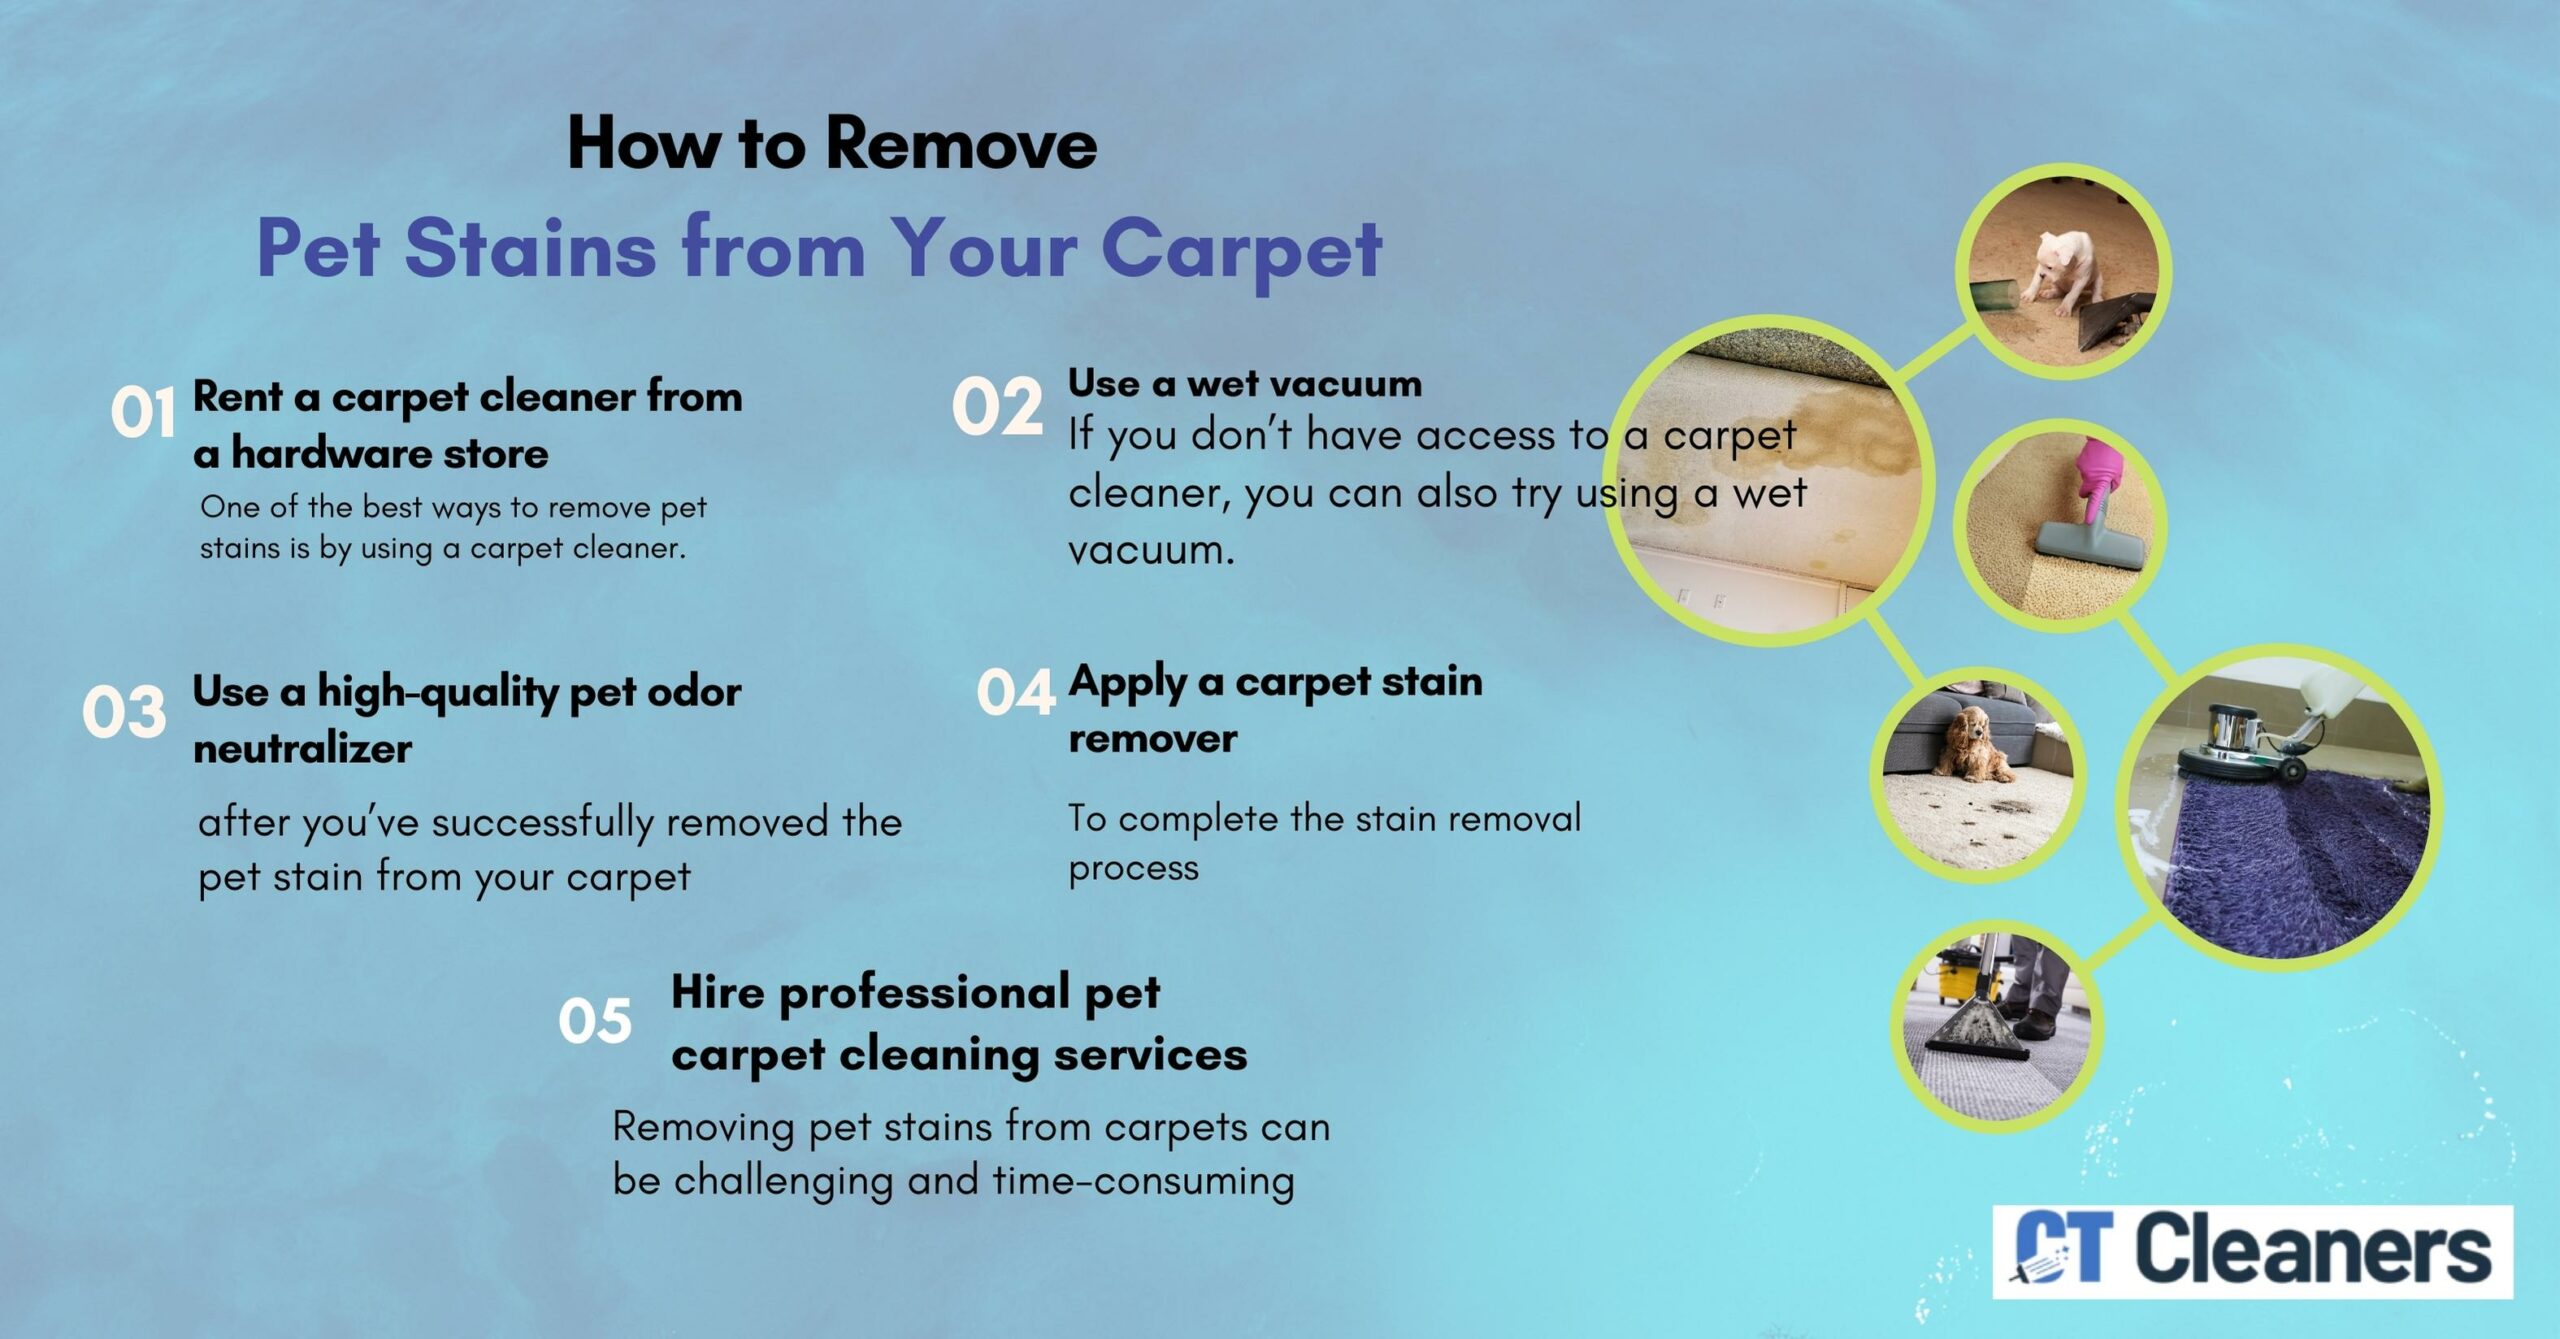 How to Remove Pet Stains from Your Carpet